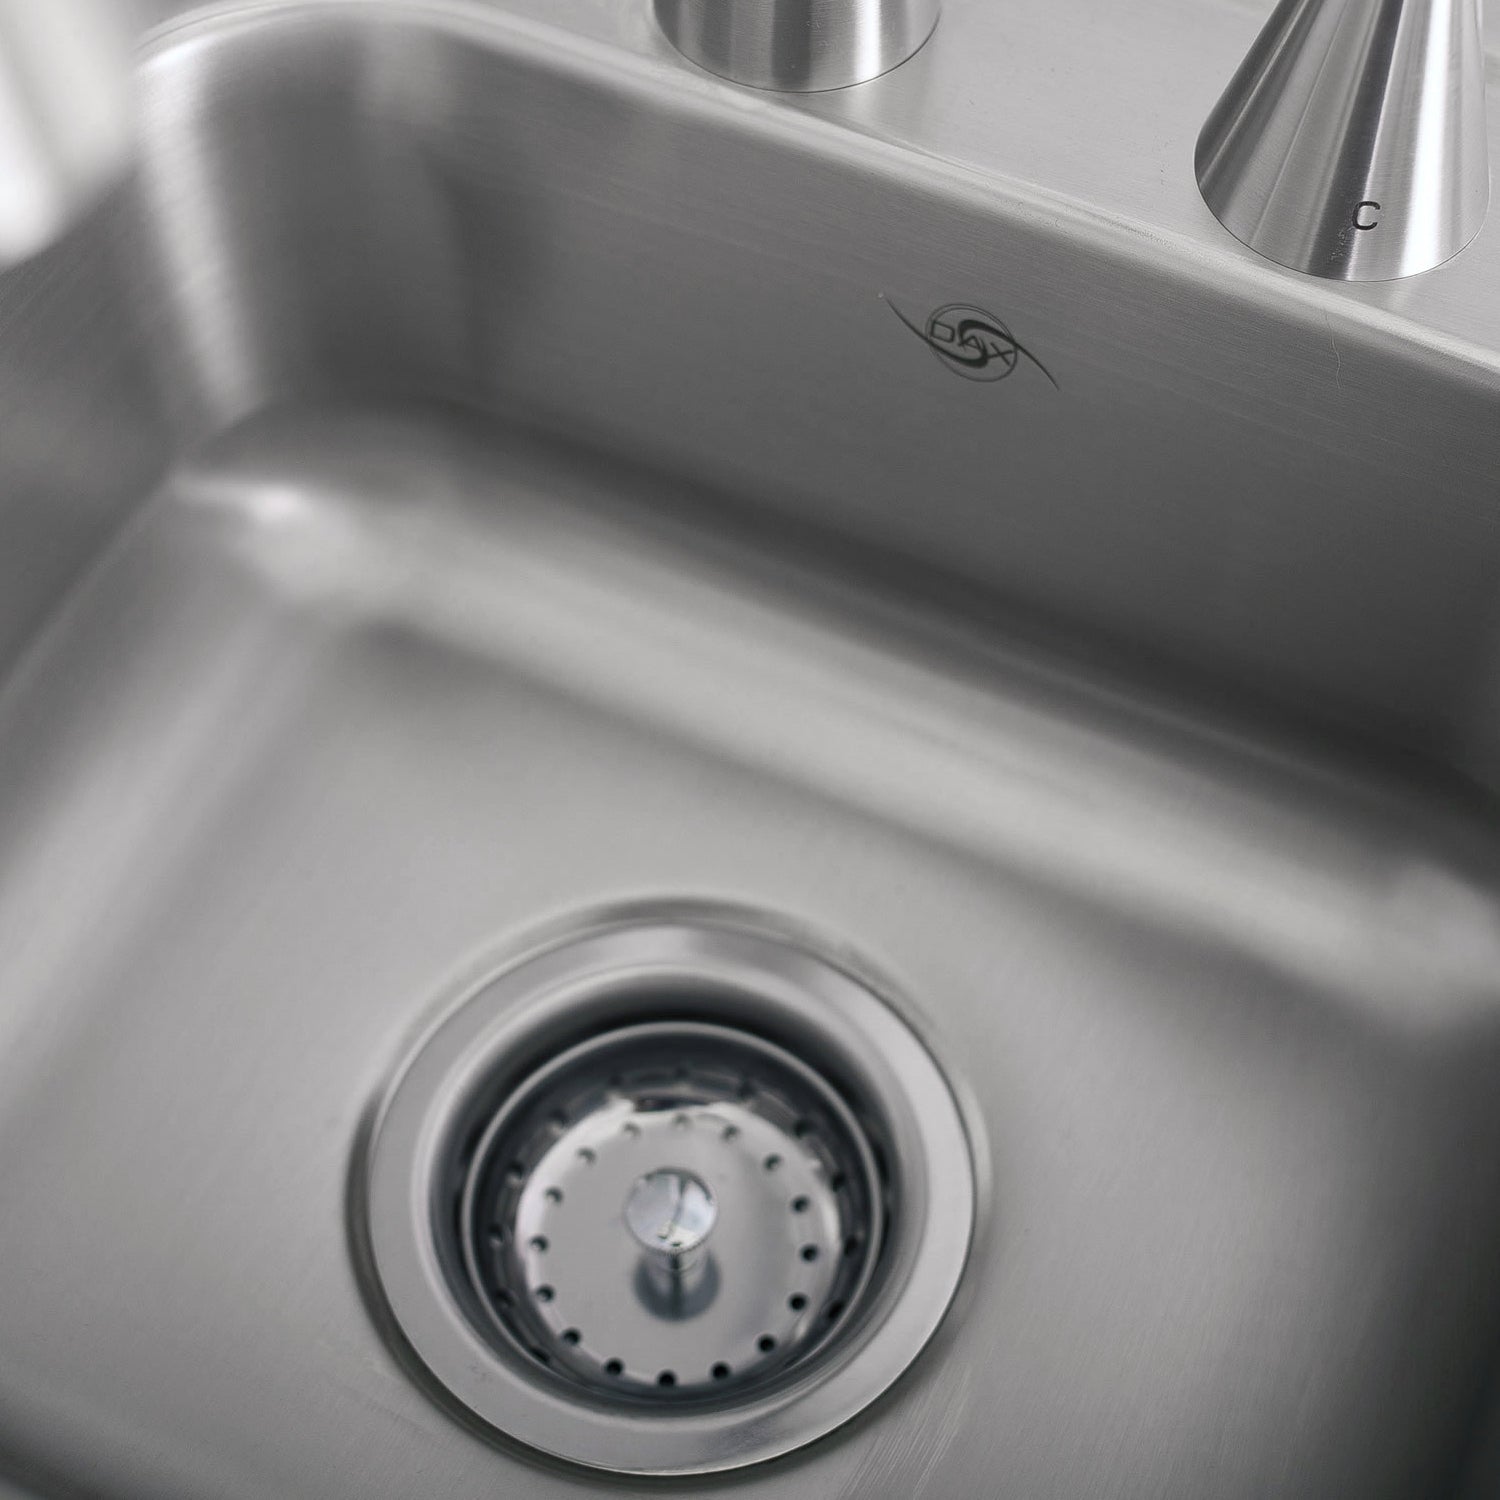 DAX  Single Bowl Top Mount Kitchen Sink, 23 Gauge Stainless Steel, Brushed Finish , 15 x 15 x 5-1/2 Inches (DAX-OM-1515)